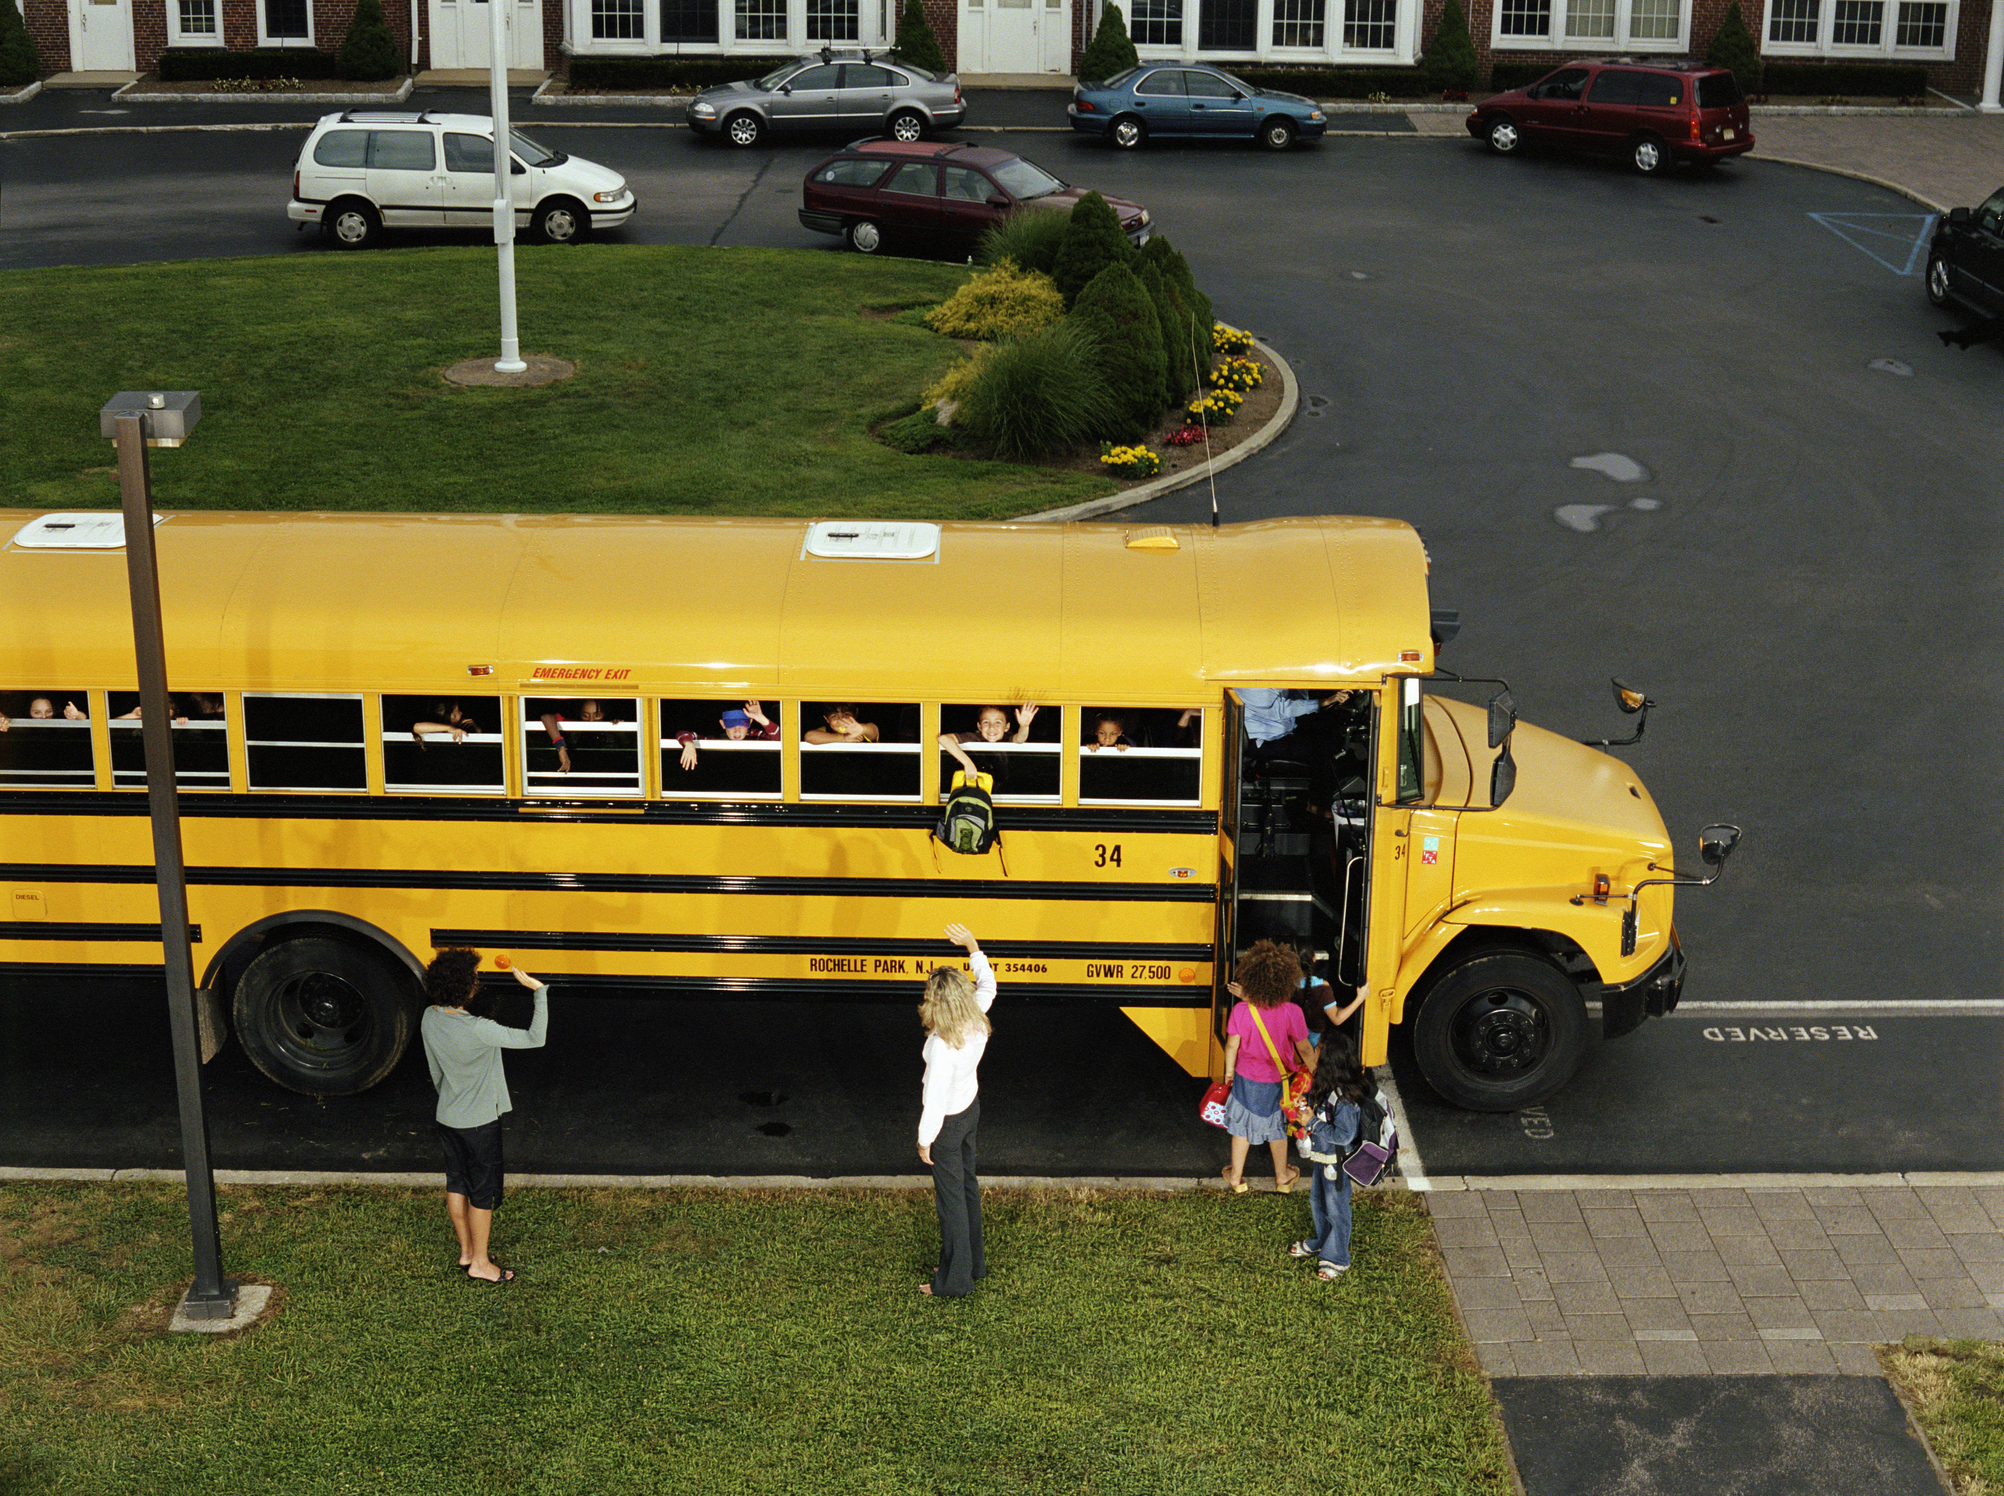 Schoolchildren waving from bus windows while adults greet them from the sidewalk